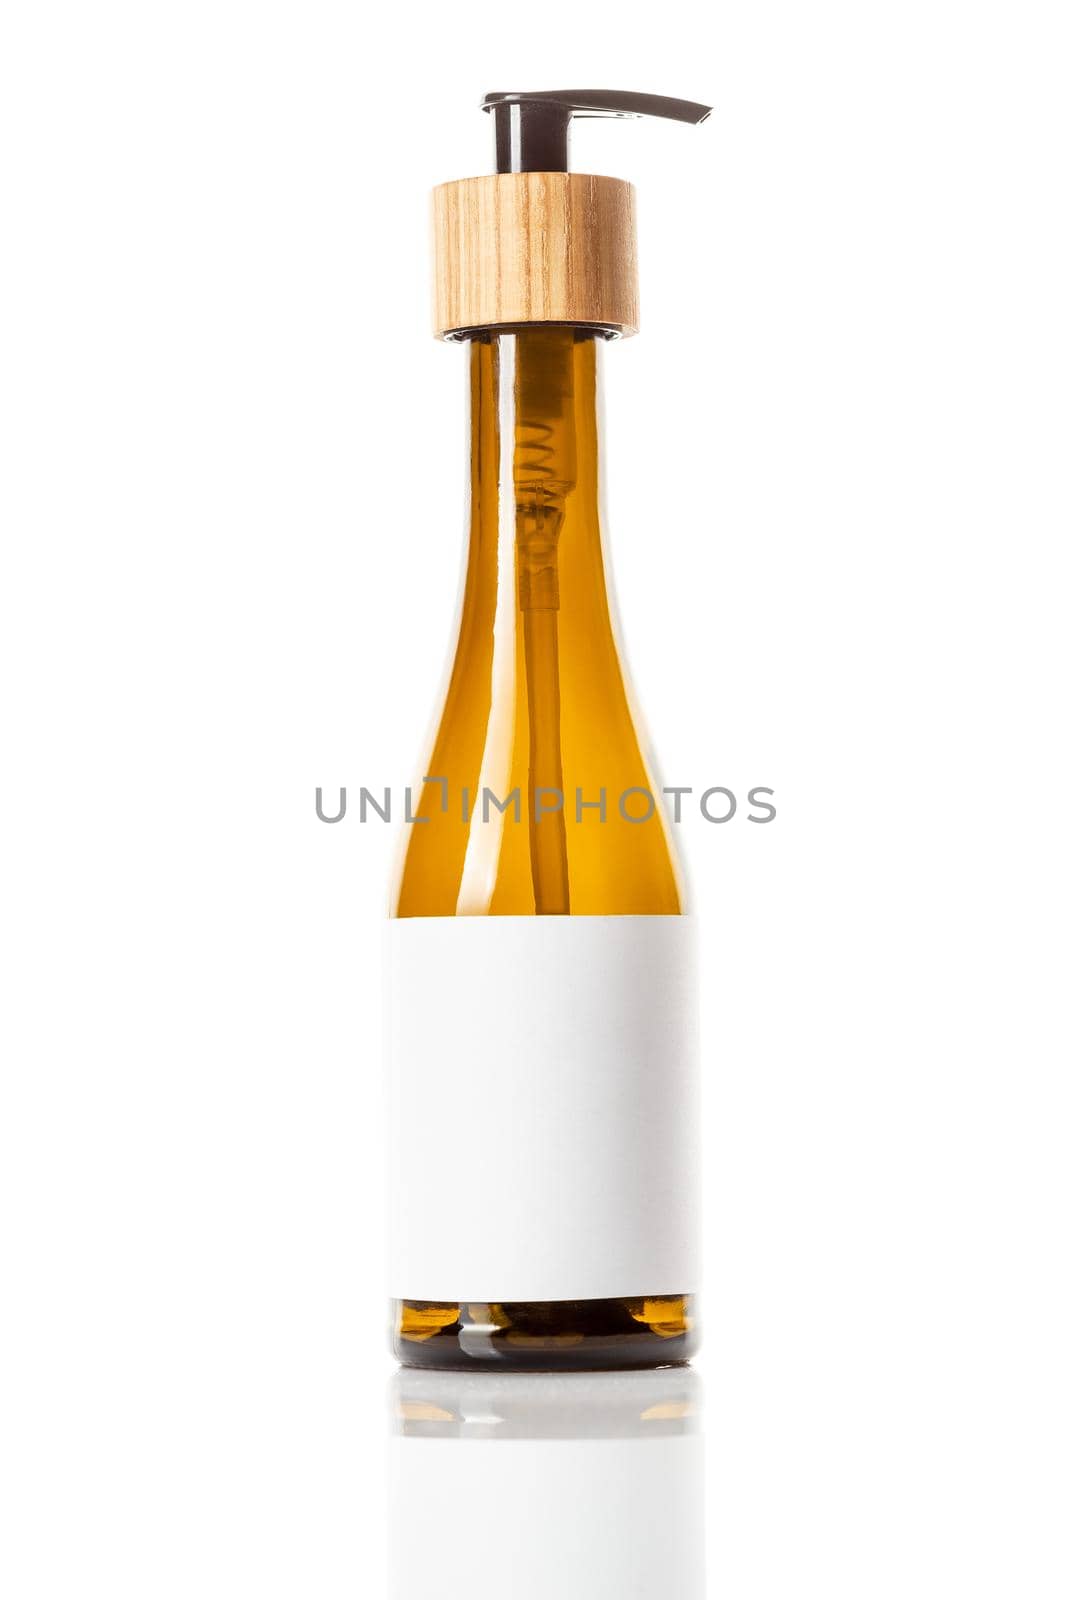 Brown glass pump dispenser bottle for cosmetics, white label with space for text, isolated on white. Bathroom accessory, Beauty product packaging